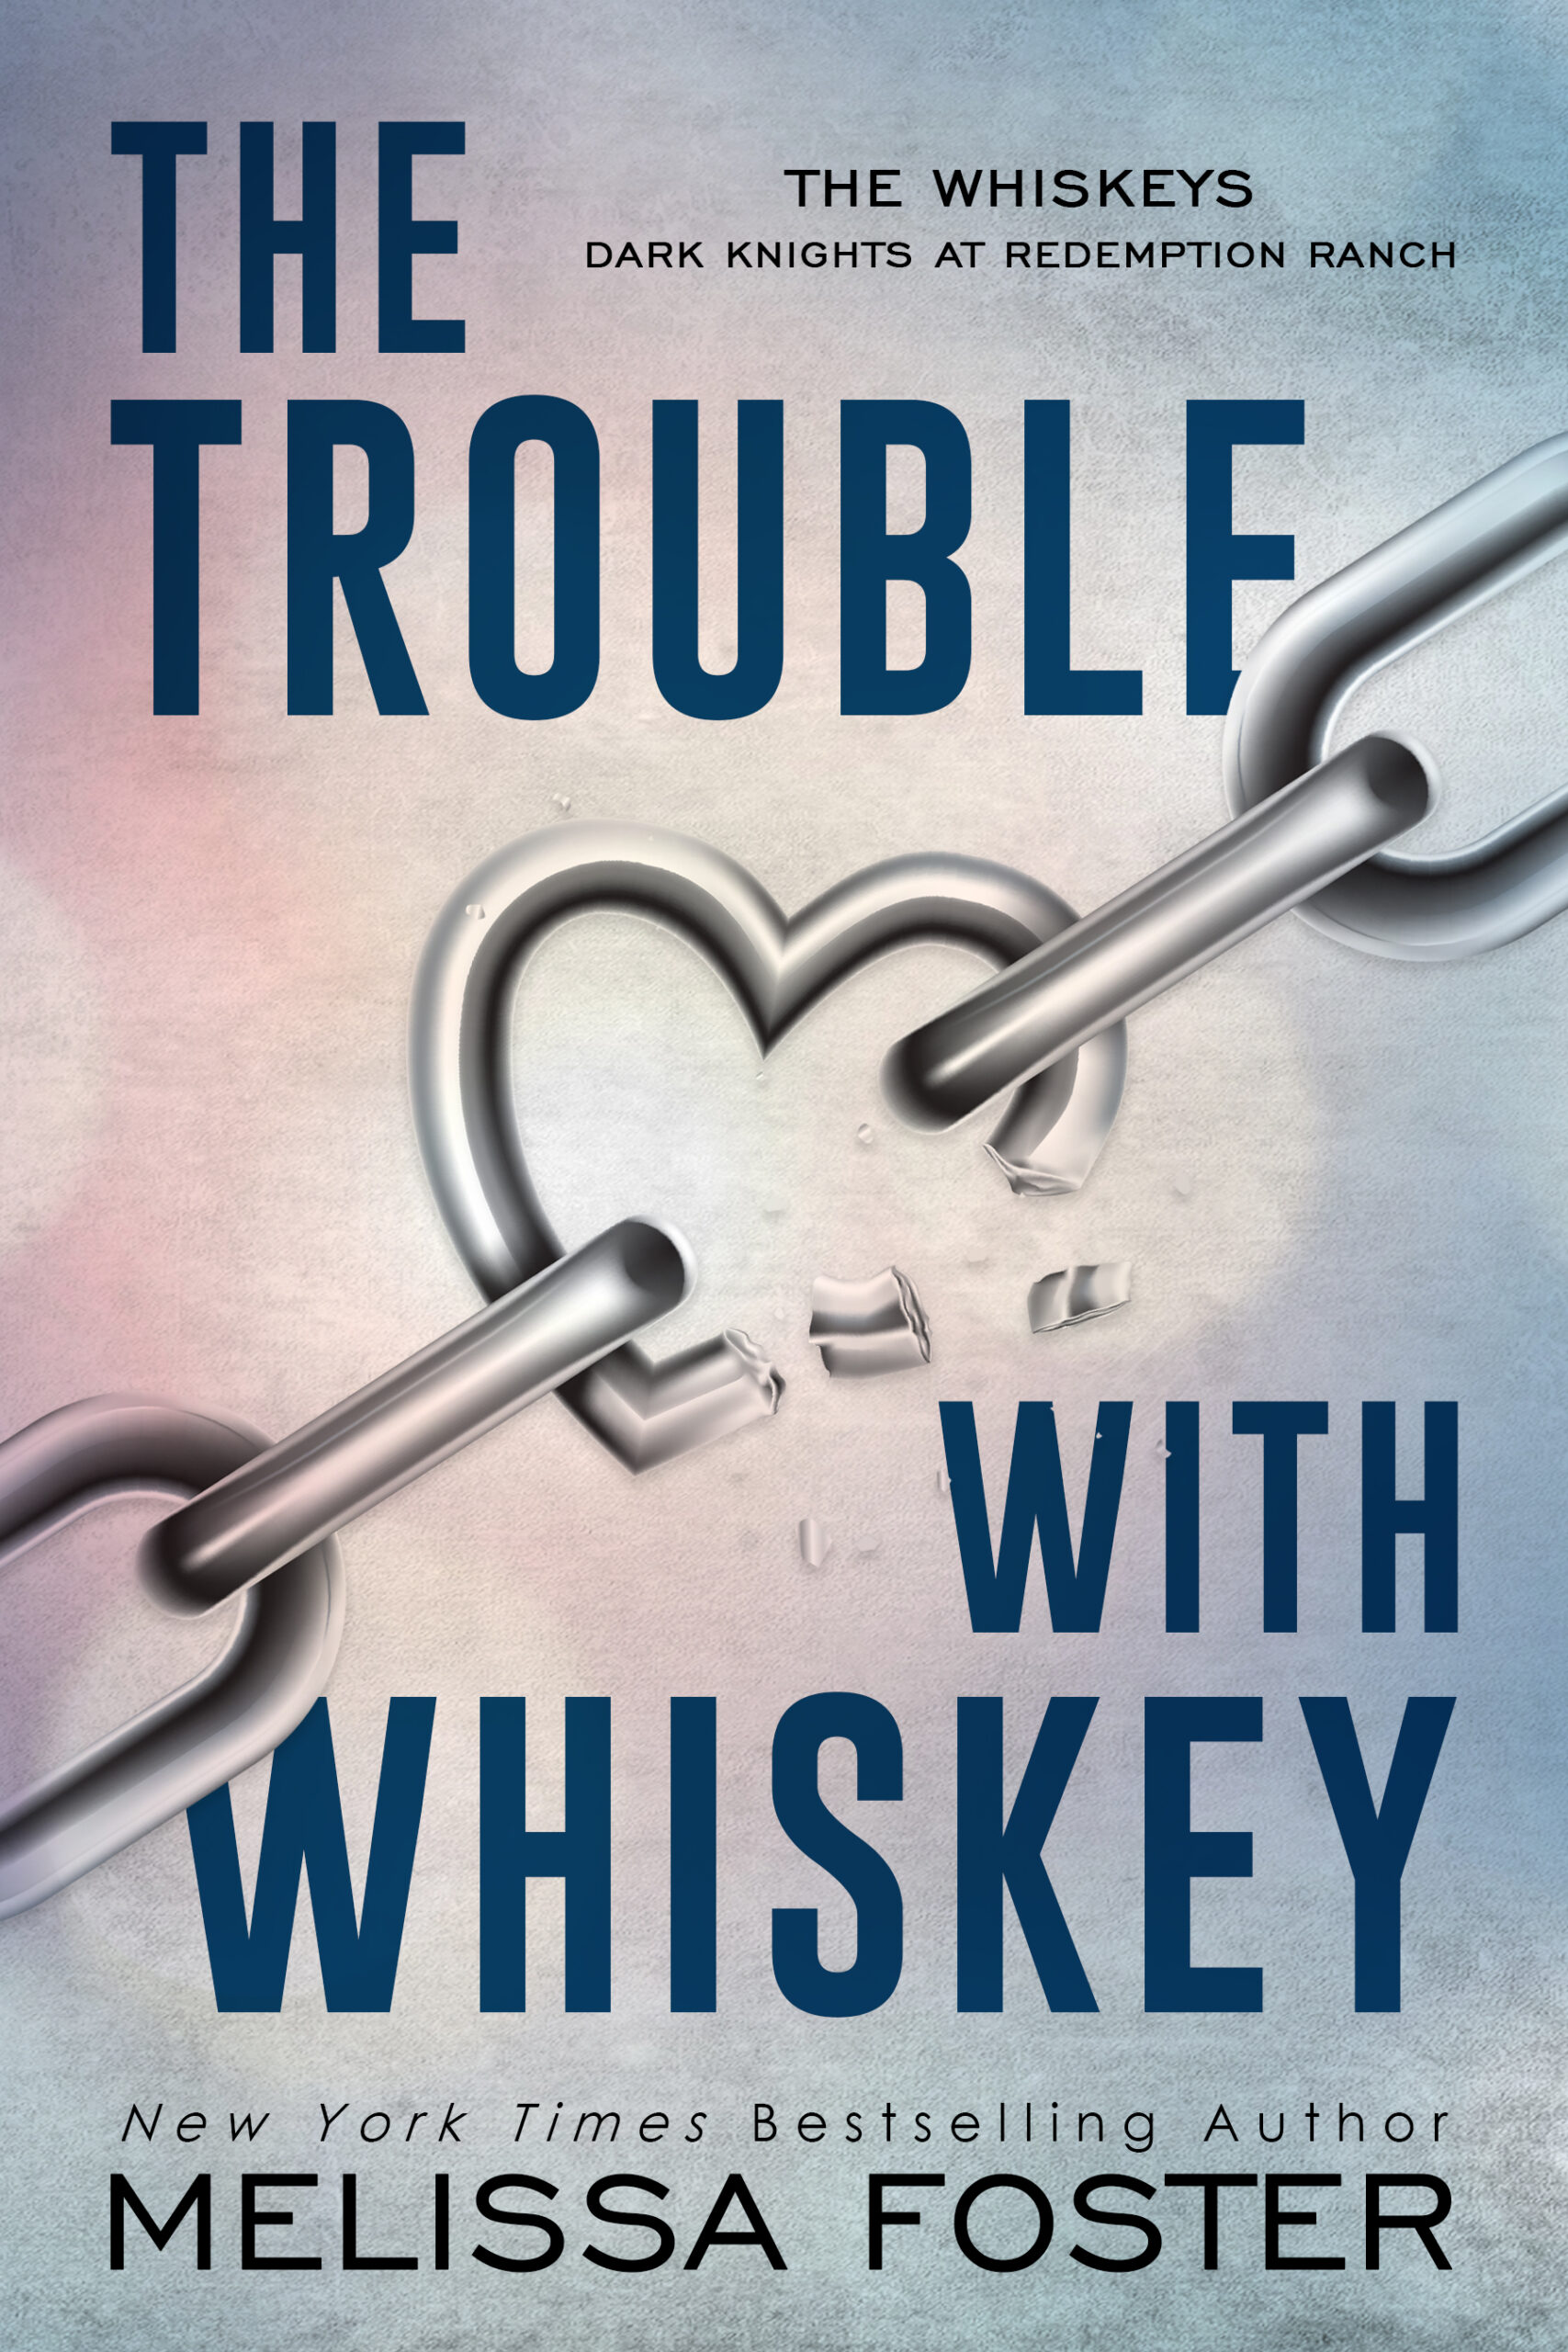 The Trouble with Whiskey by Melissa Foster, special edition paperback